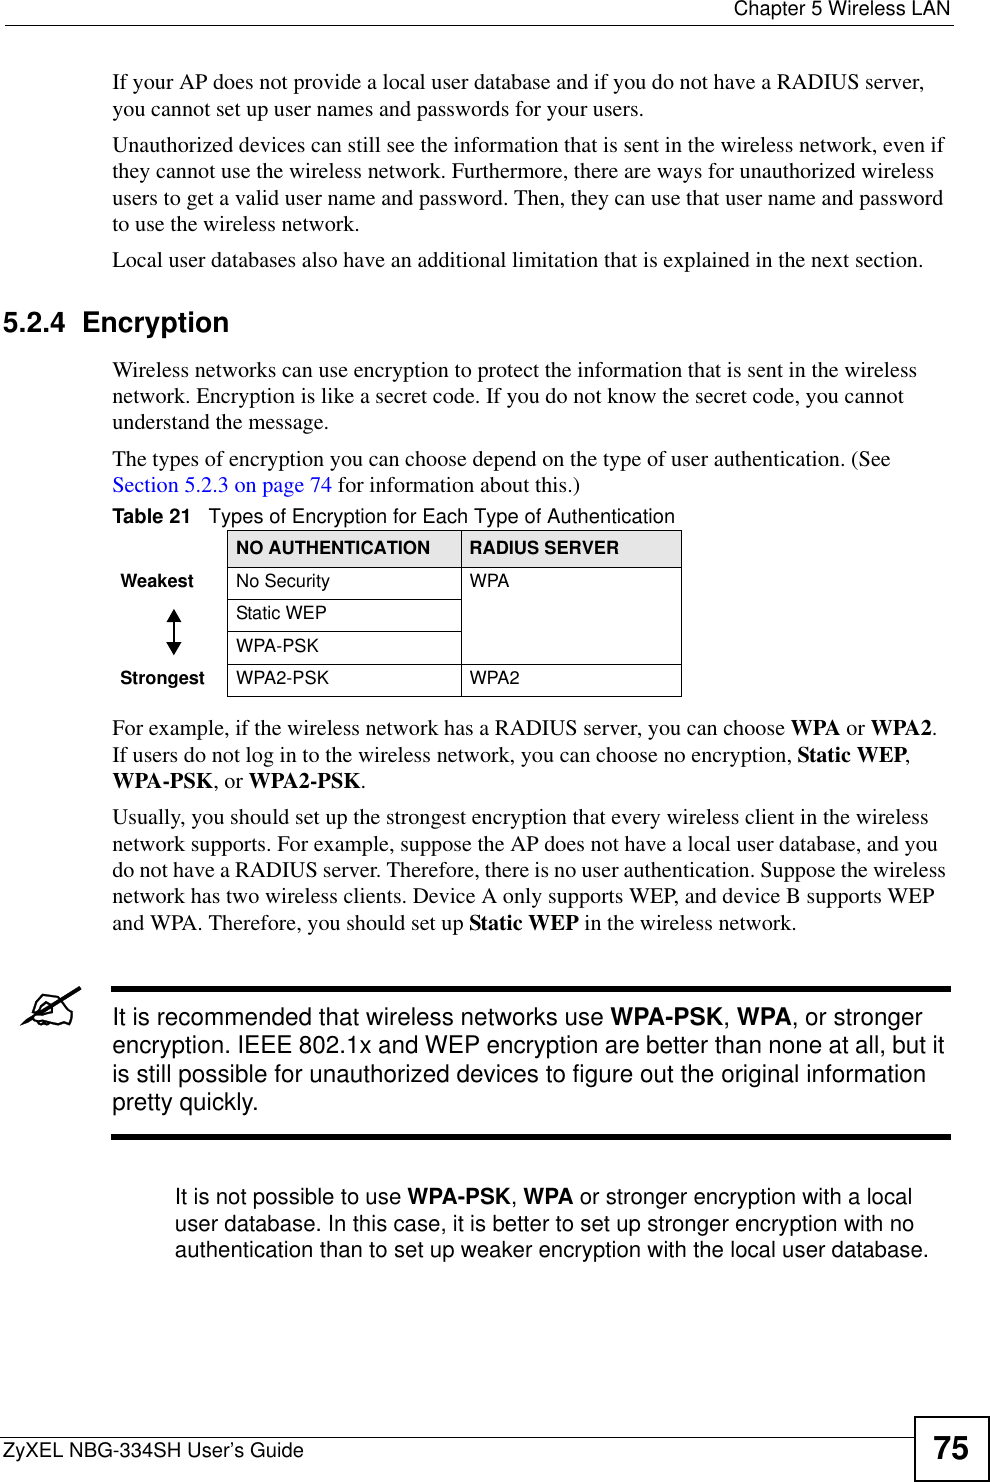  Chapter 5 Wireless LANZyXEL NBG-334SH User’s Guide 75If your AP does not provide a local user database and if you do not have a RADIUS server, you cannot set up user names and passwords for your users.Unauthorized devices can still see the information that is sent in the wireless network, even if they cannot use the wireless network. Furthermore, there are ways for unauthorized wireless users to get a valid user name and password. Then, they can use that user name and password to use the wireless network.Local user databases also have an additional limitation that is explained in the next section.5.2.4  EncryptionWireless networks can use encryption to protect the information that is sent in the wireless network. Encryption is like a secret code. If you do not know the secret code, you cannot understand the message.The types of encryption you can choose depend on the type of user authentication. (See Section 5.2.3 on page 74 for information about this.)For example, if the wireless network has a RADIUS server, you can choose WPA or WPA2.If users do not log in to the wireless network, you can choose no encryption, Static WEP,WPA-PSK, or WPA2-PSK.Usually, you should set up the strongest encryption that every wireless client in the wireless network supports. For example, suppose the AP does not have a local user database, and you do not have a RADIUS server. Therefore, there is no user authentication. Suppose the wireless network has two wireless clients. Device A only supports WEP, and device B supports WEP and WPA. Therefore, you should set up Static WEP in the wireless network.&quot;It is recommended that wireless networks use WPA-PSK,WPA, or stronger encryption. IEEE 802.1x and WEP encryption are better than none at all, but it is still possible for unauthorized devices to figure out the original information pretty quickly.It is not possible to use WPA-PSK,WPA or stronger encryption with a local user database. In this case, it is better to set up stronger encryption with no authentication than to set up weaker encryption with the local user database.Table 21   Types of Encryption for Each Type of AuthenticationNO AUTHENTICATION RADIUS SERVERWeakest No Security WPAStatic WEPWPA-PSKStrongest WPA2-PSK WPA2